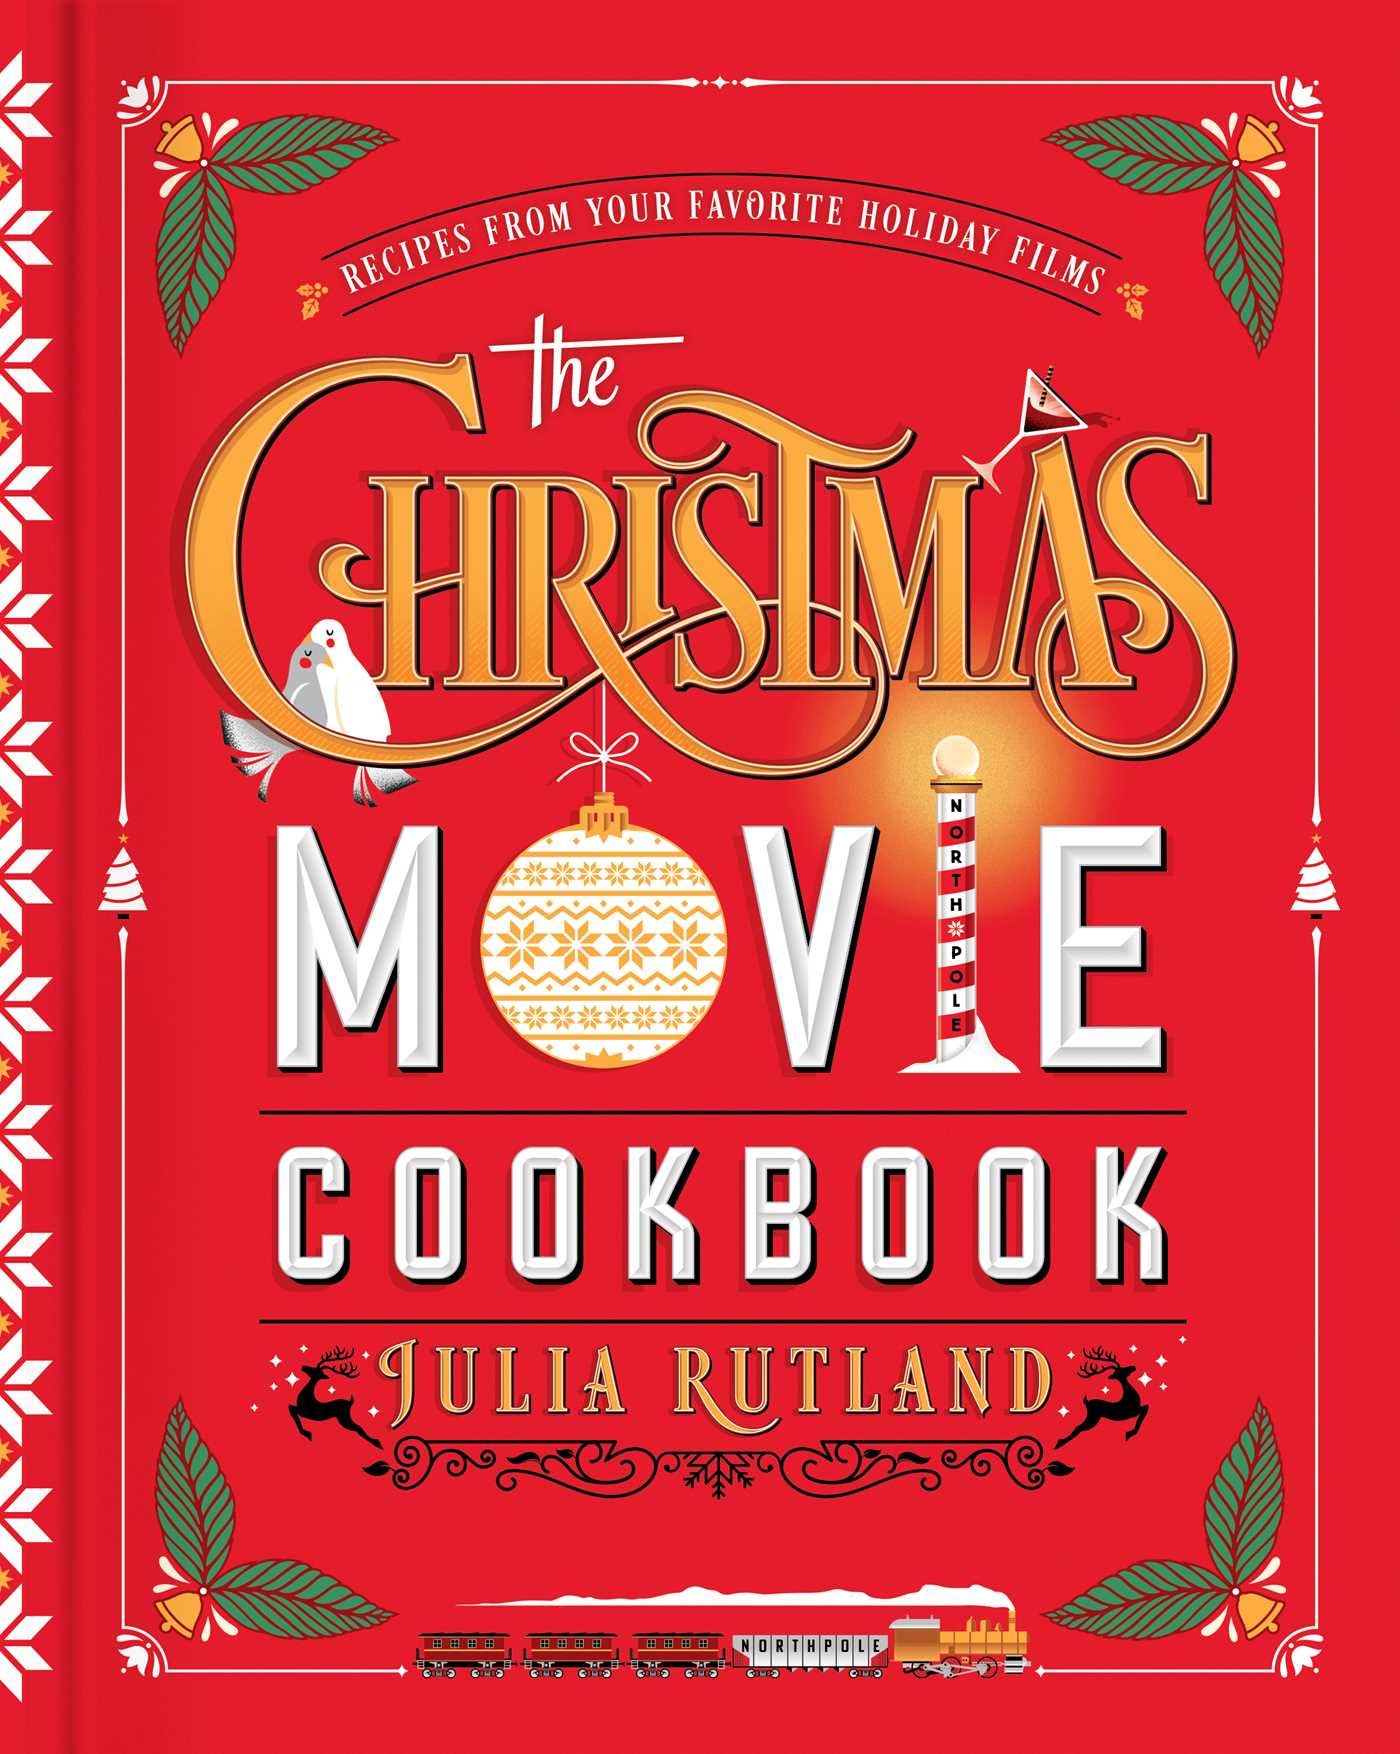 The Christmas Movie Cookbook: Recipes from Your Favorite Holiday Films  by Julia Rutland